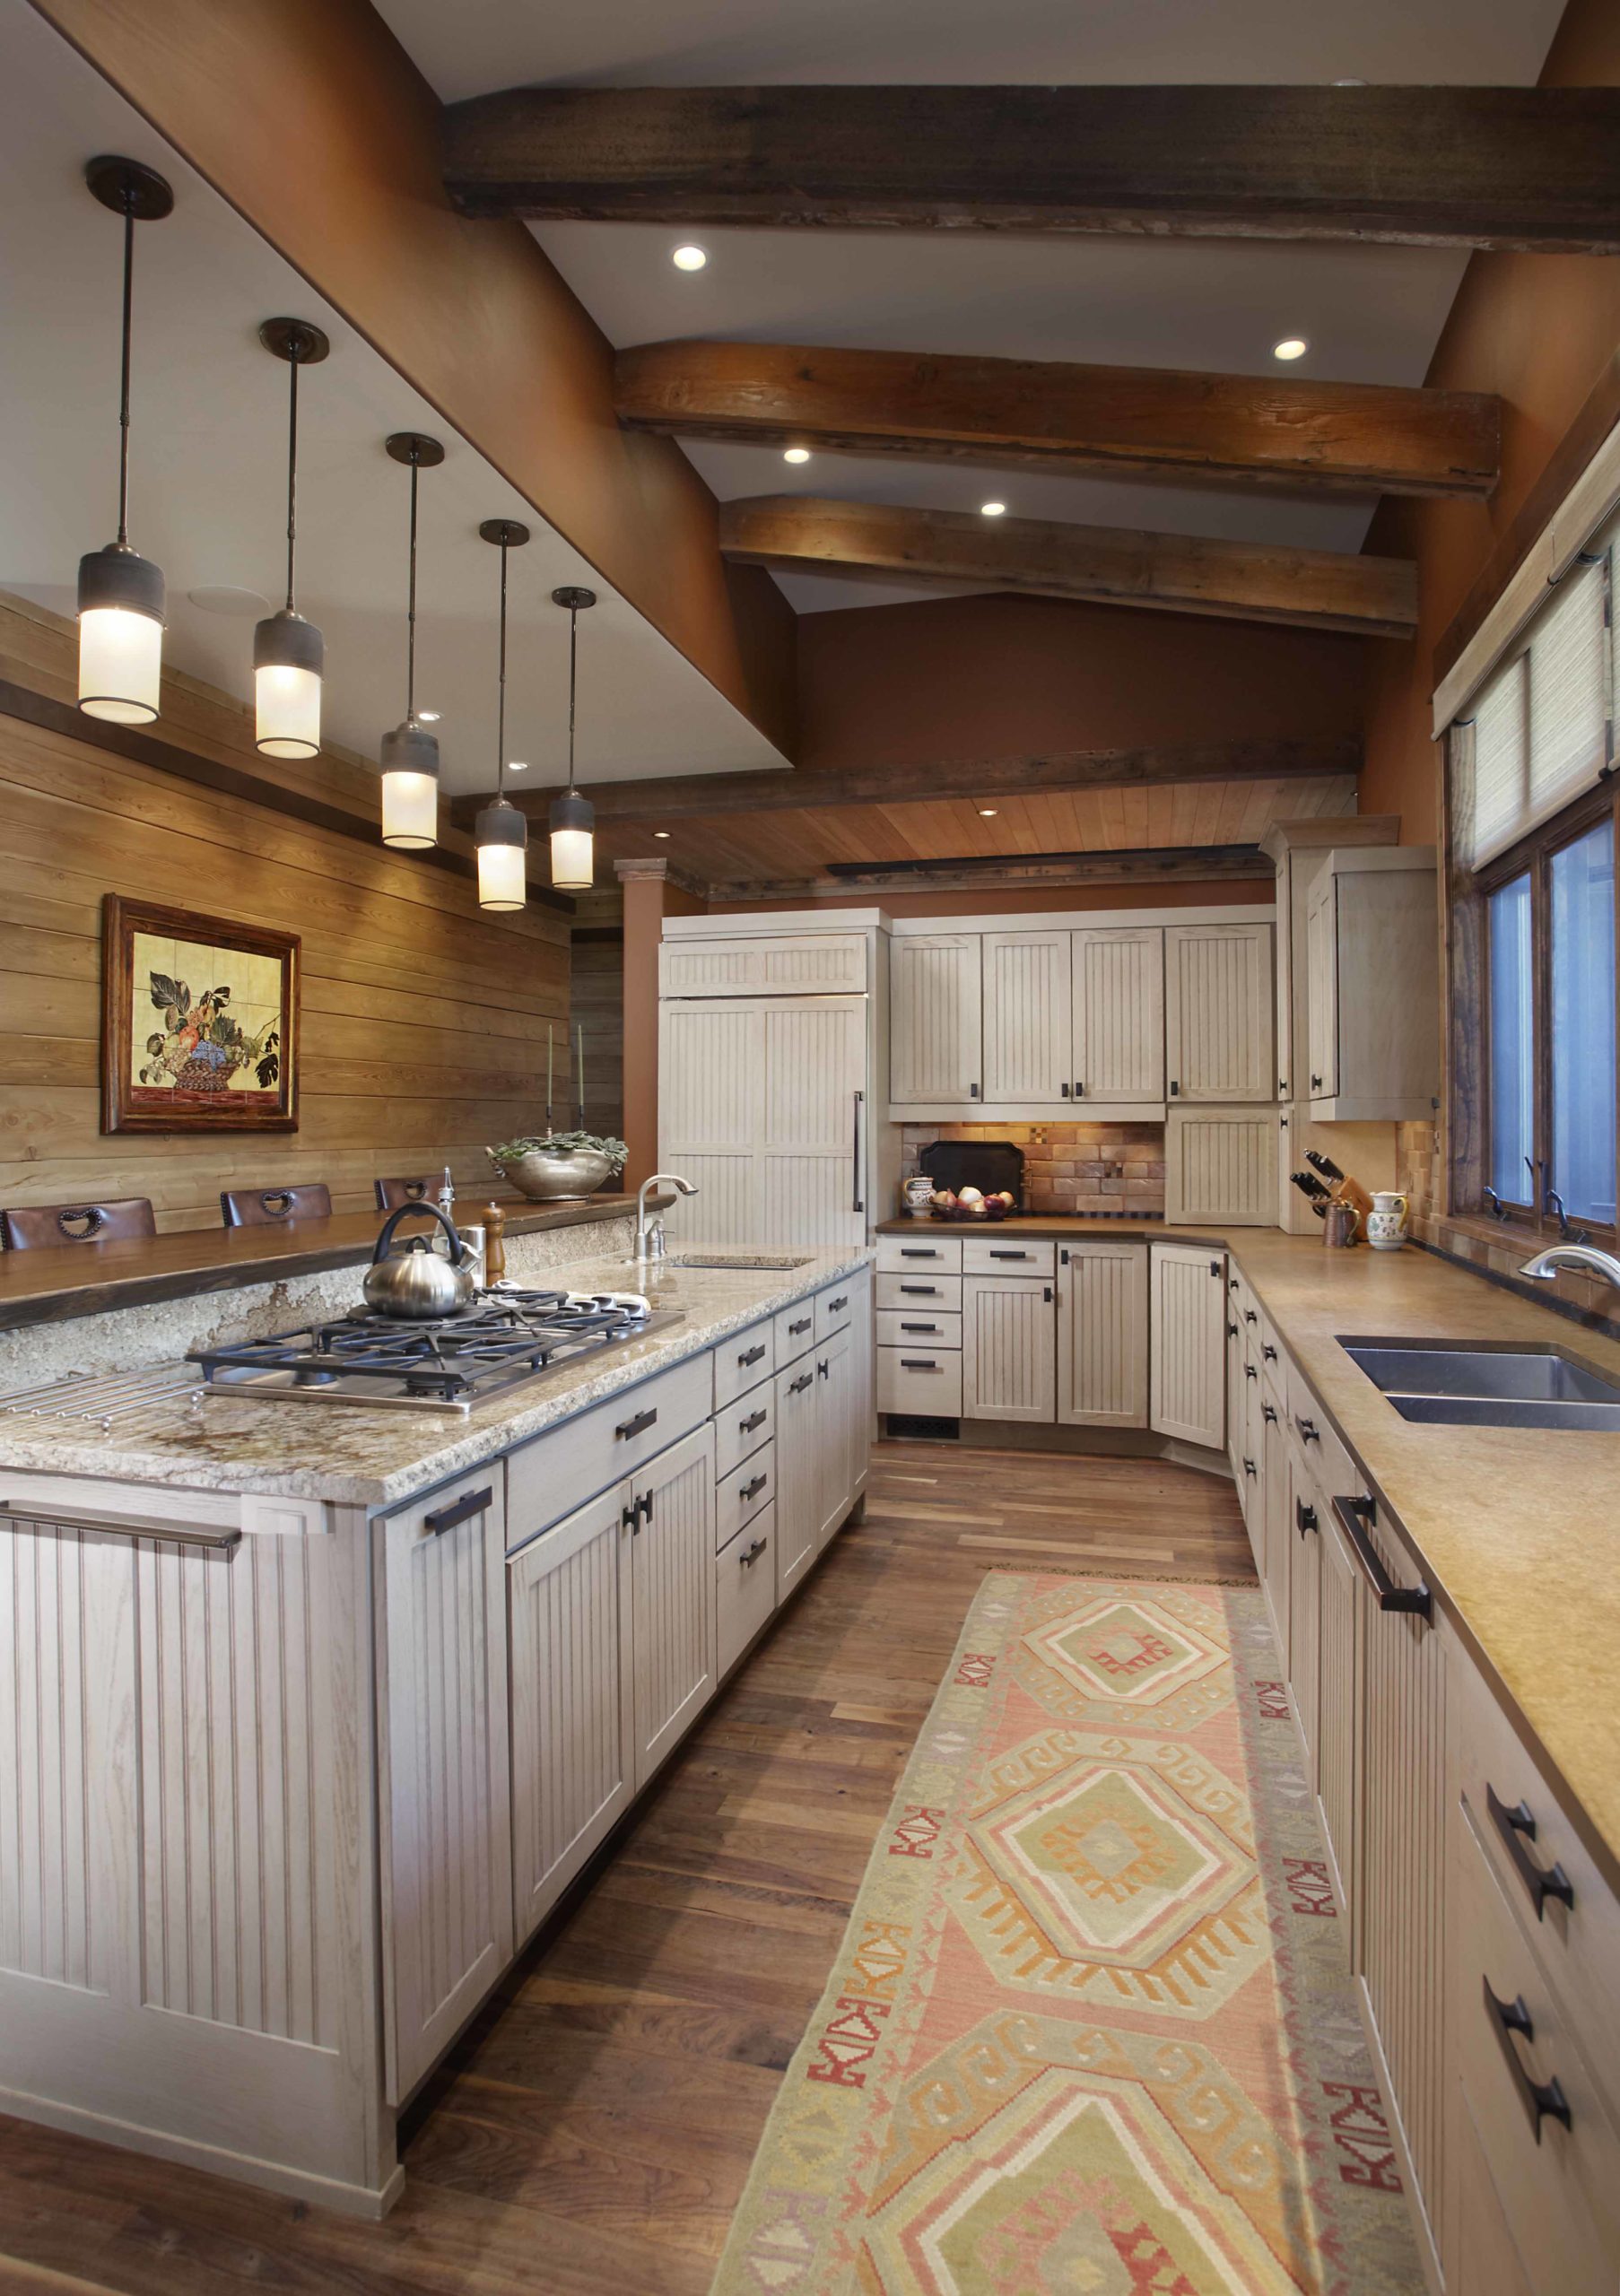 Long kitchen with white washed cabinets and dark wooden beams